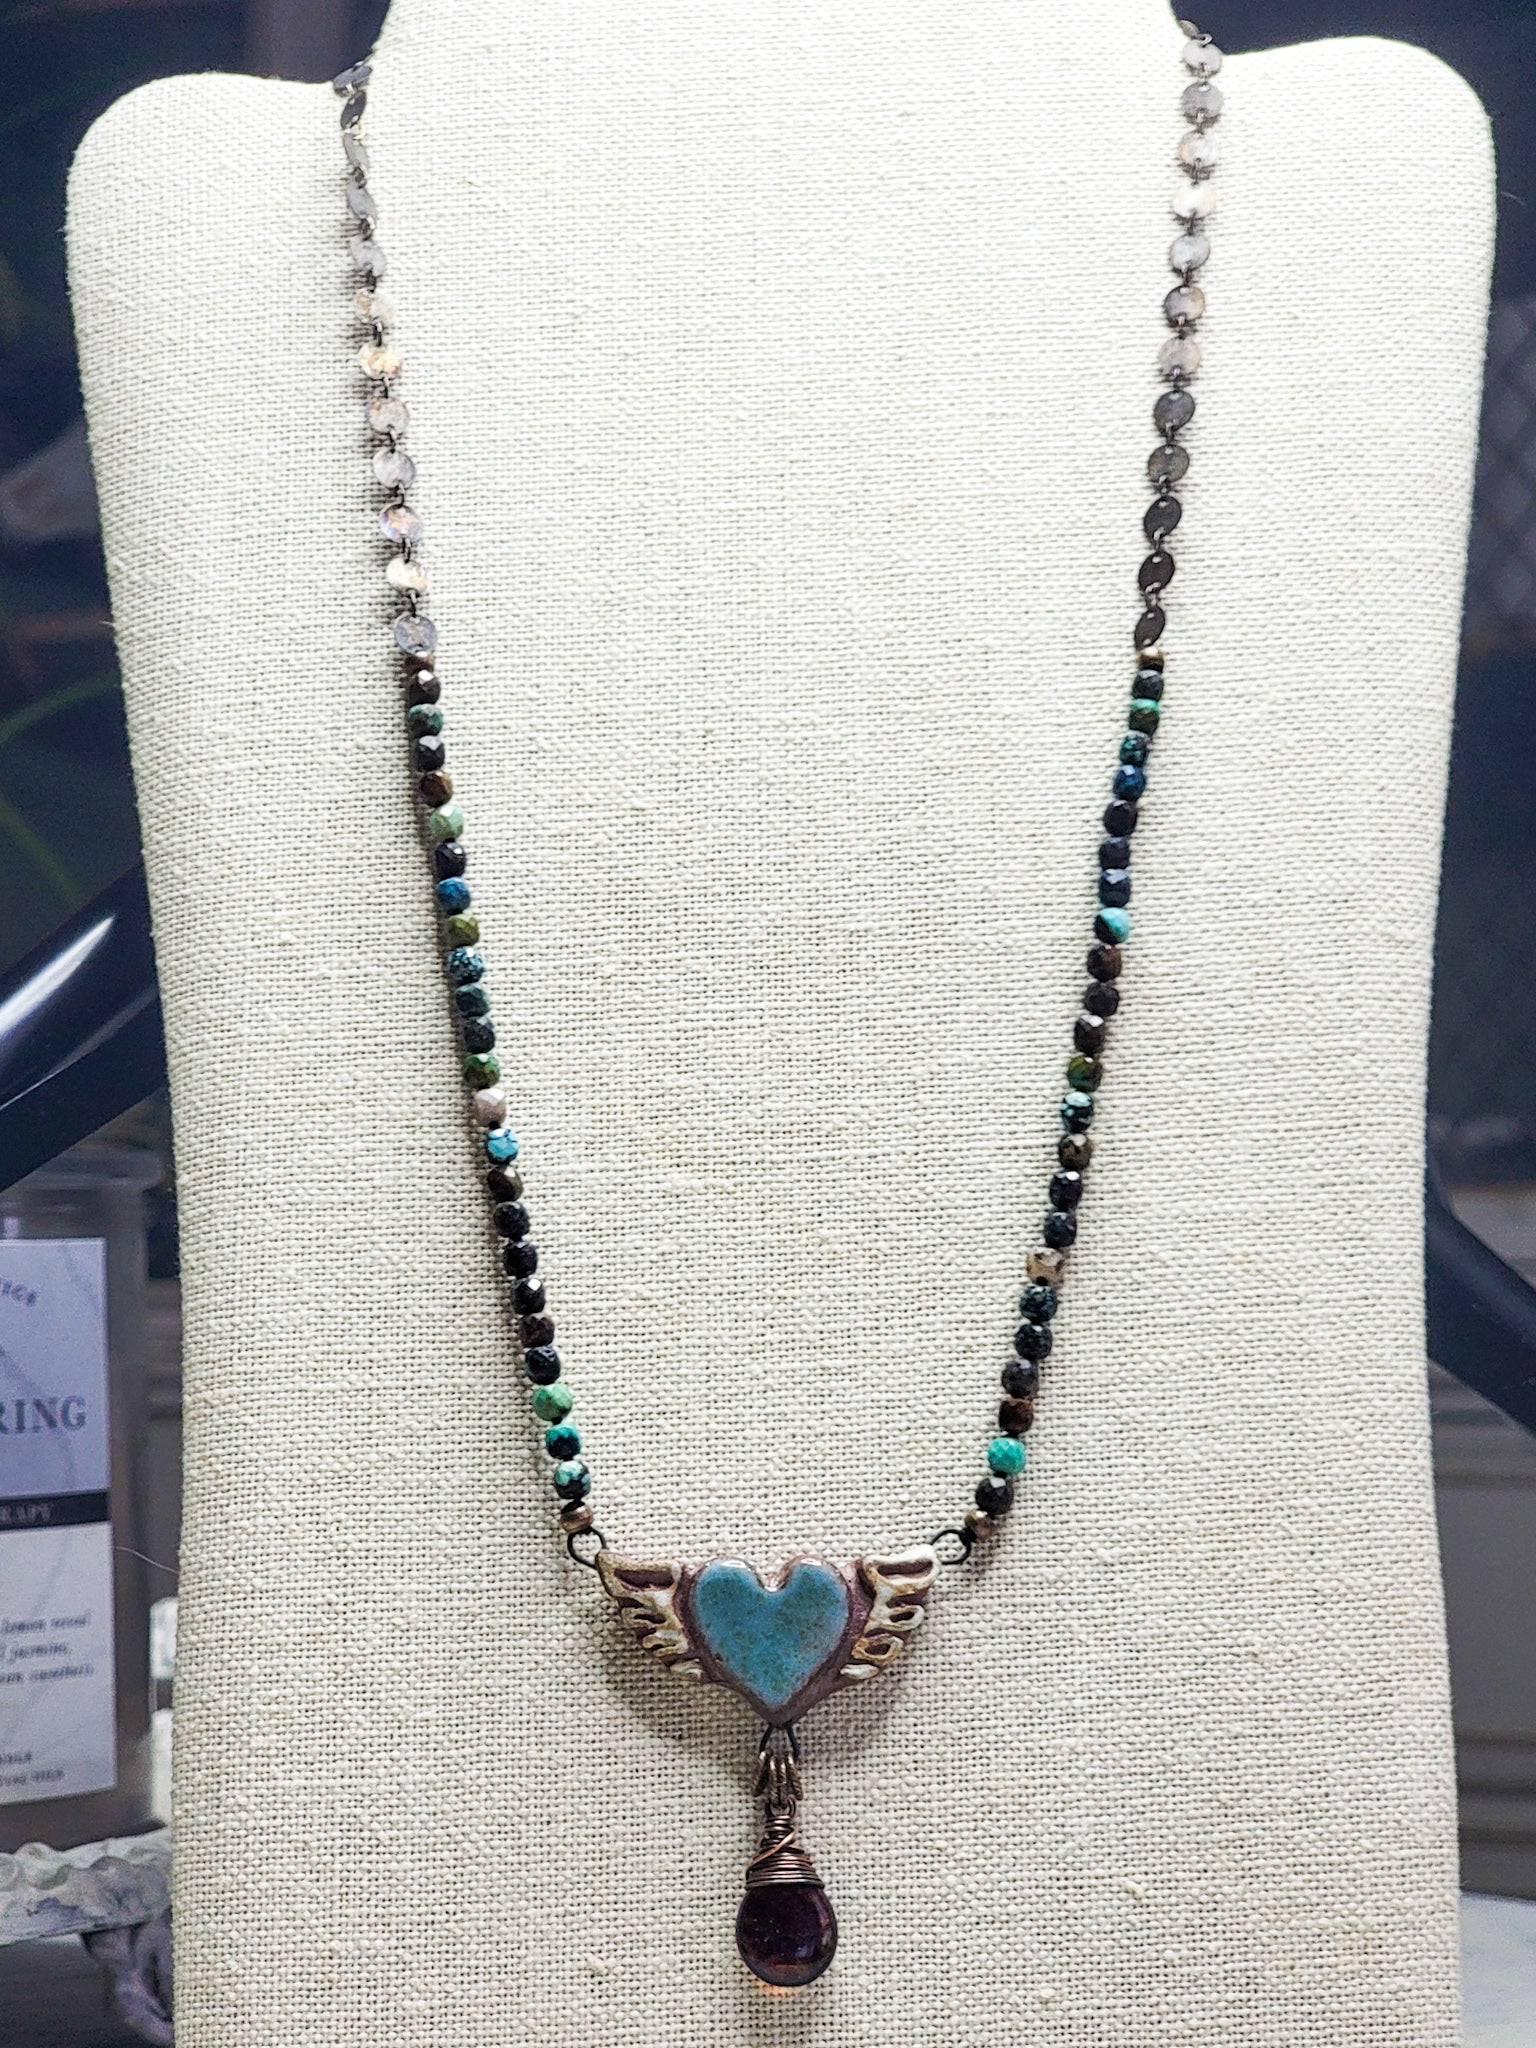 Knotted Turquoise Gemstone Necklace, Nicki Lynn Jewelry 